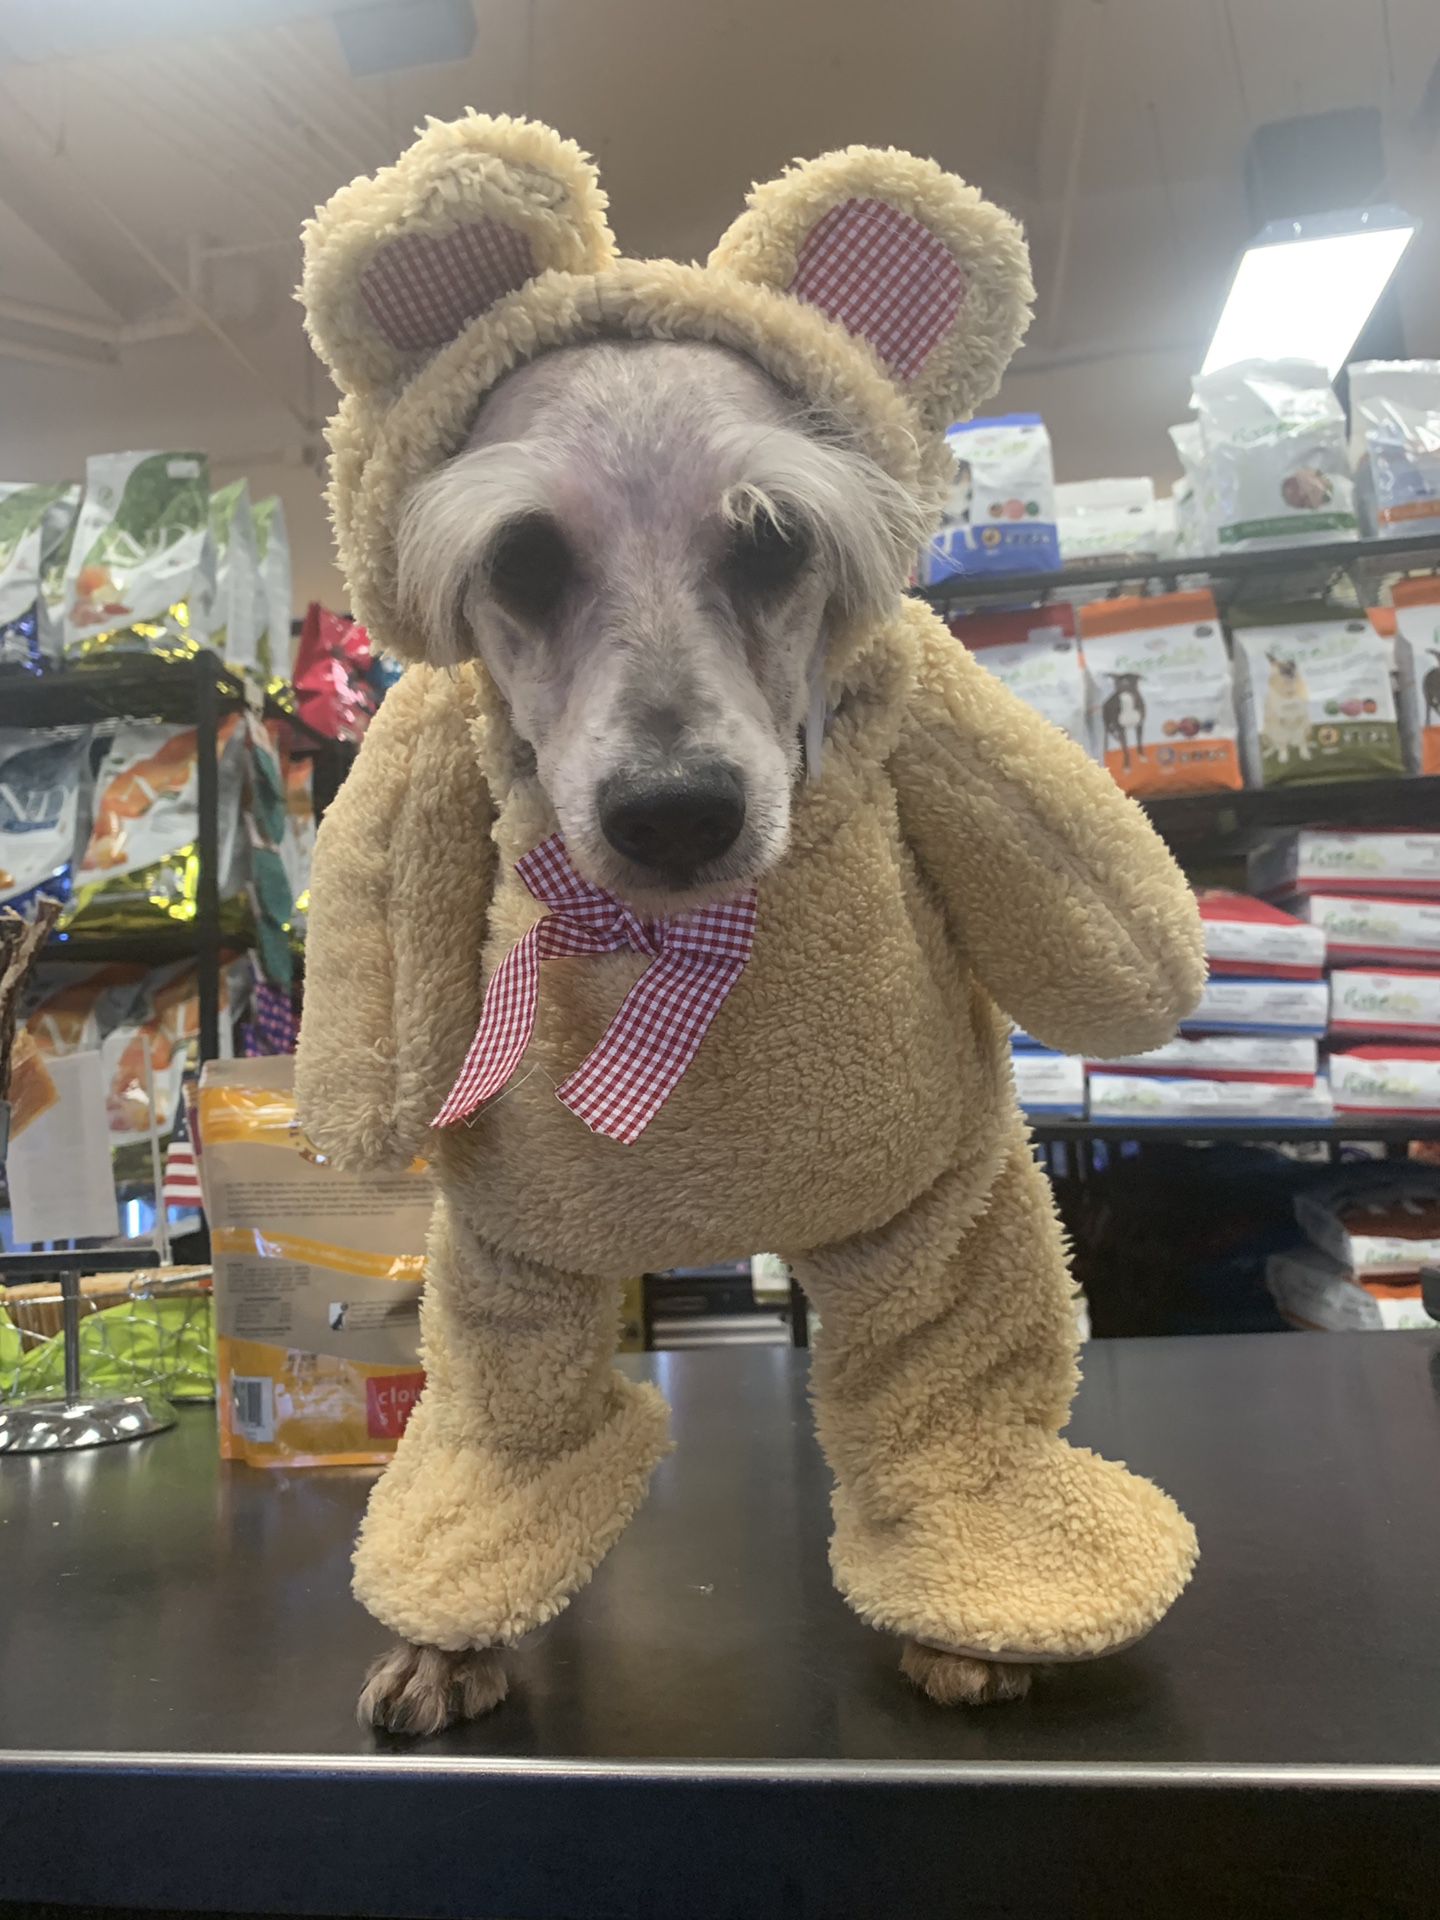 Doggy costumes